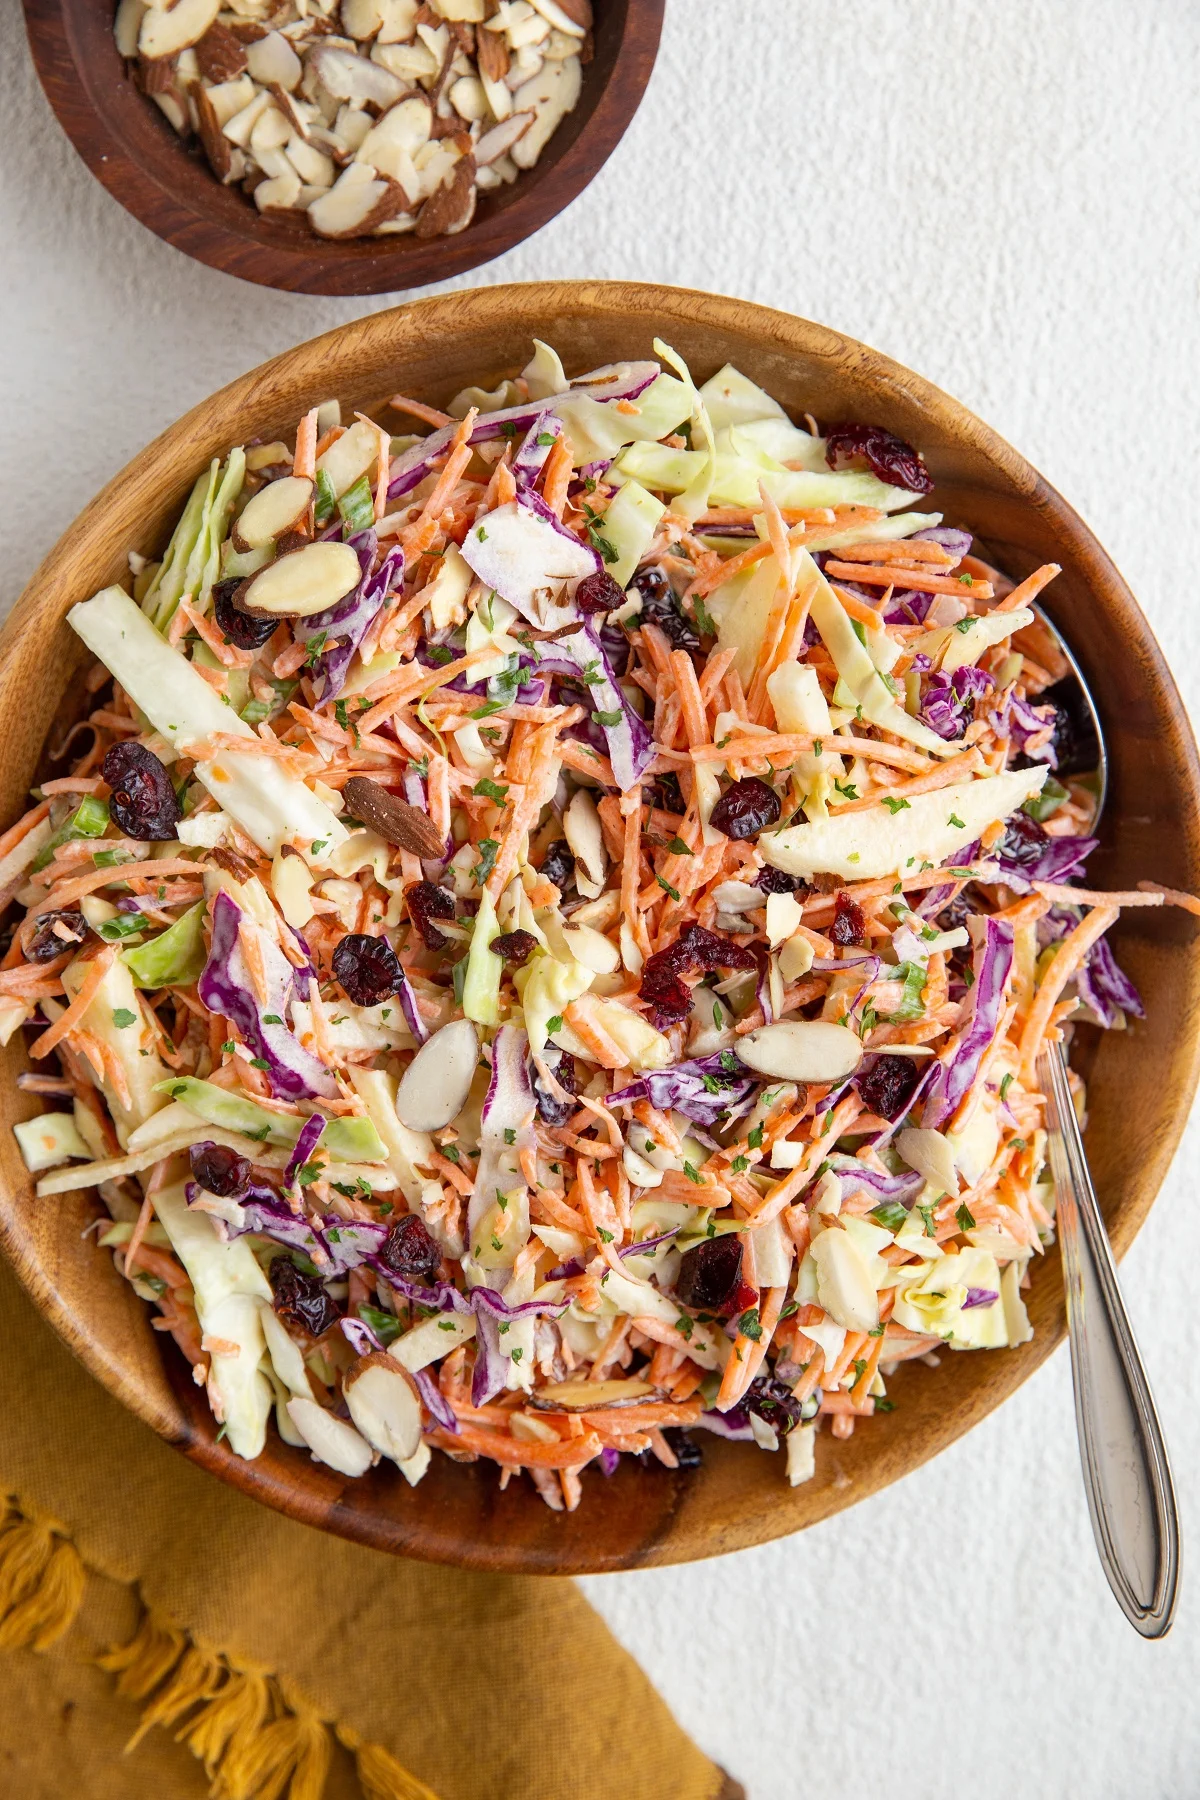 Carrot coleslaw in a large bowl ready to serve.